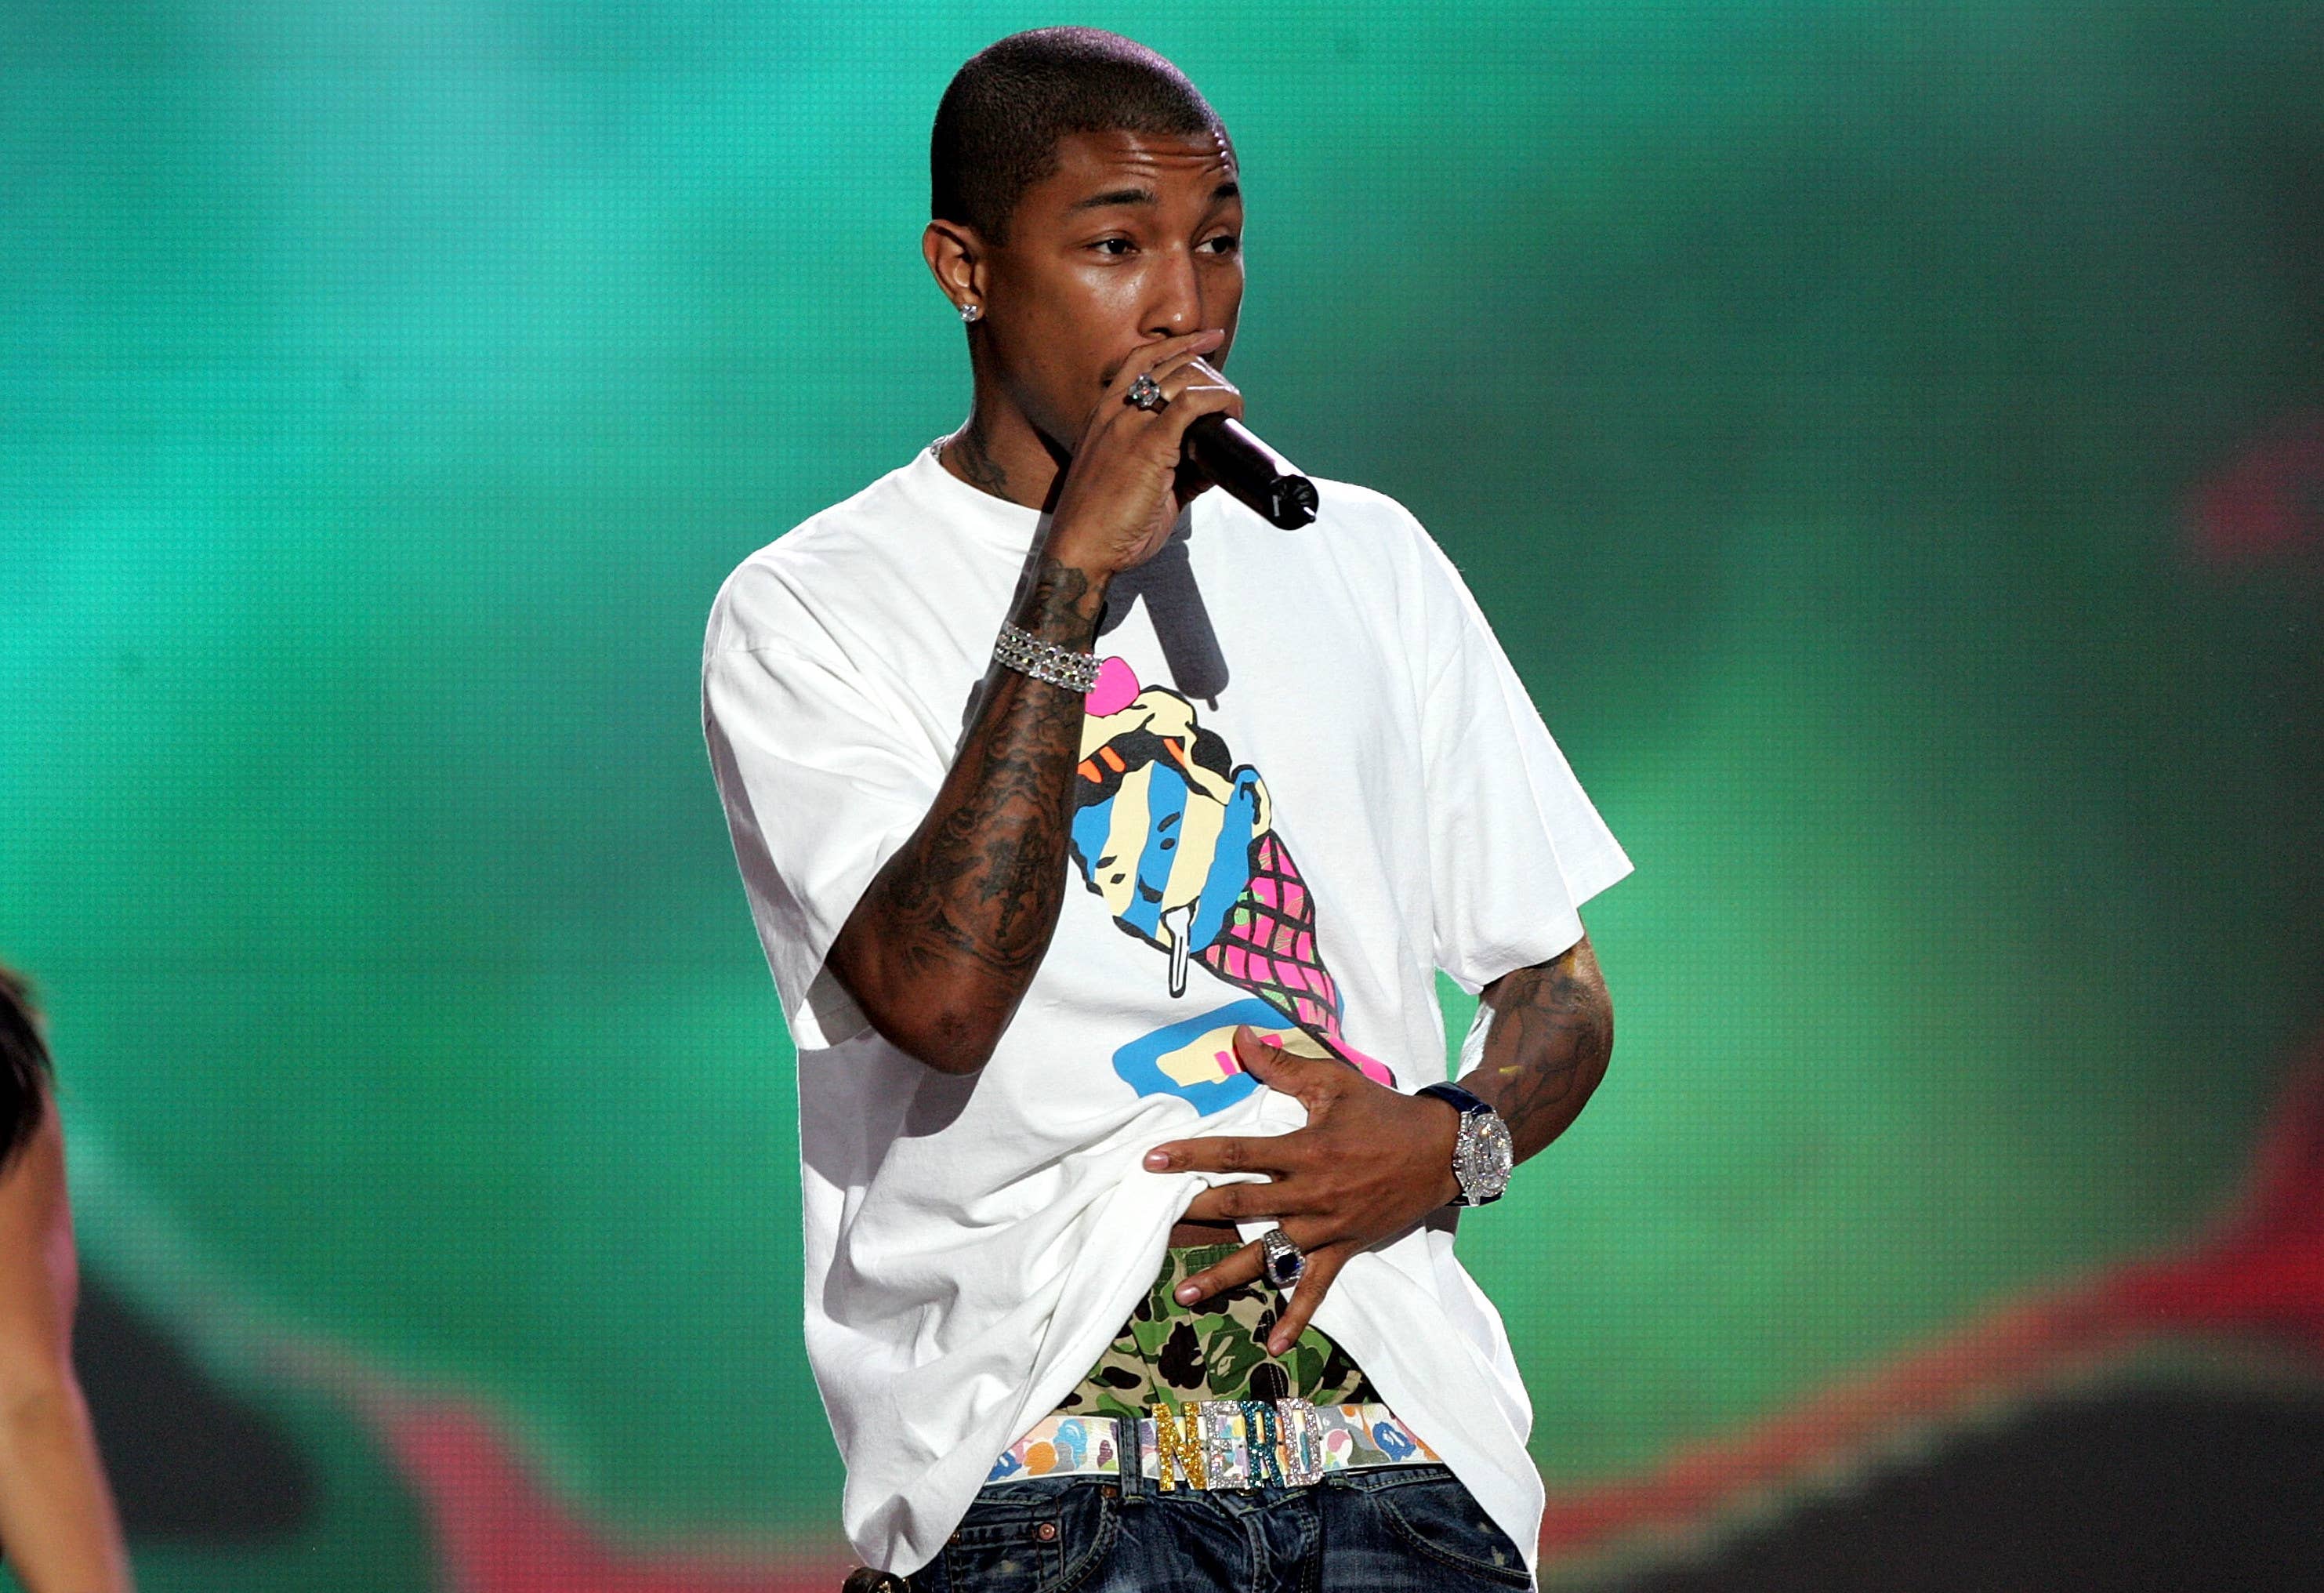 Pharrell wants you to dress for the job you have